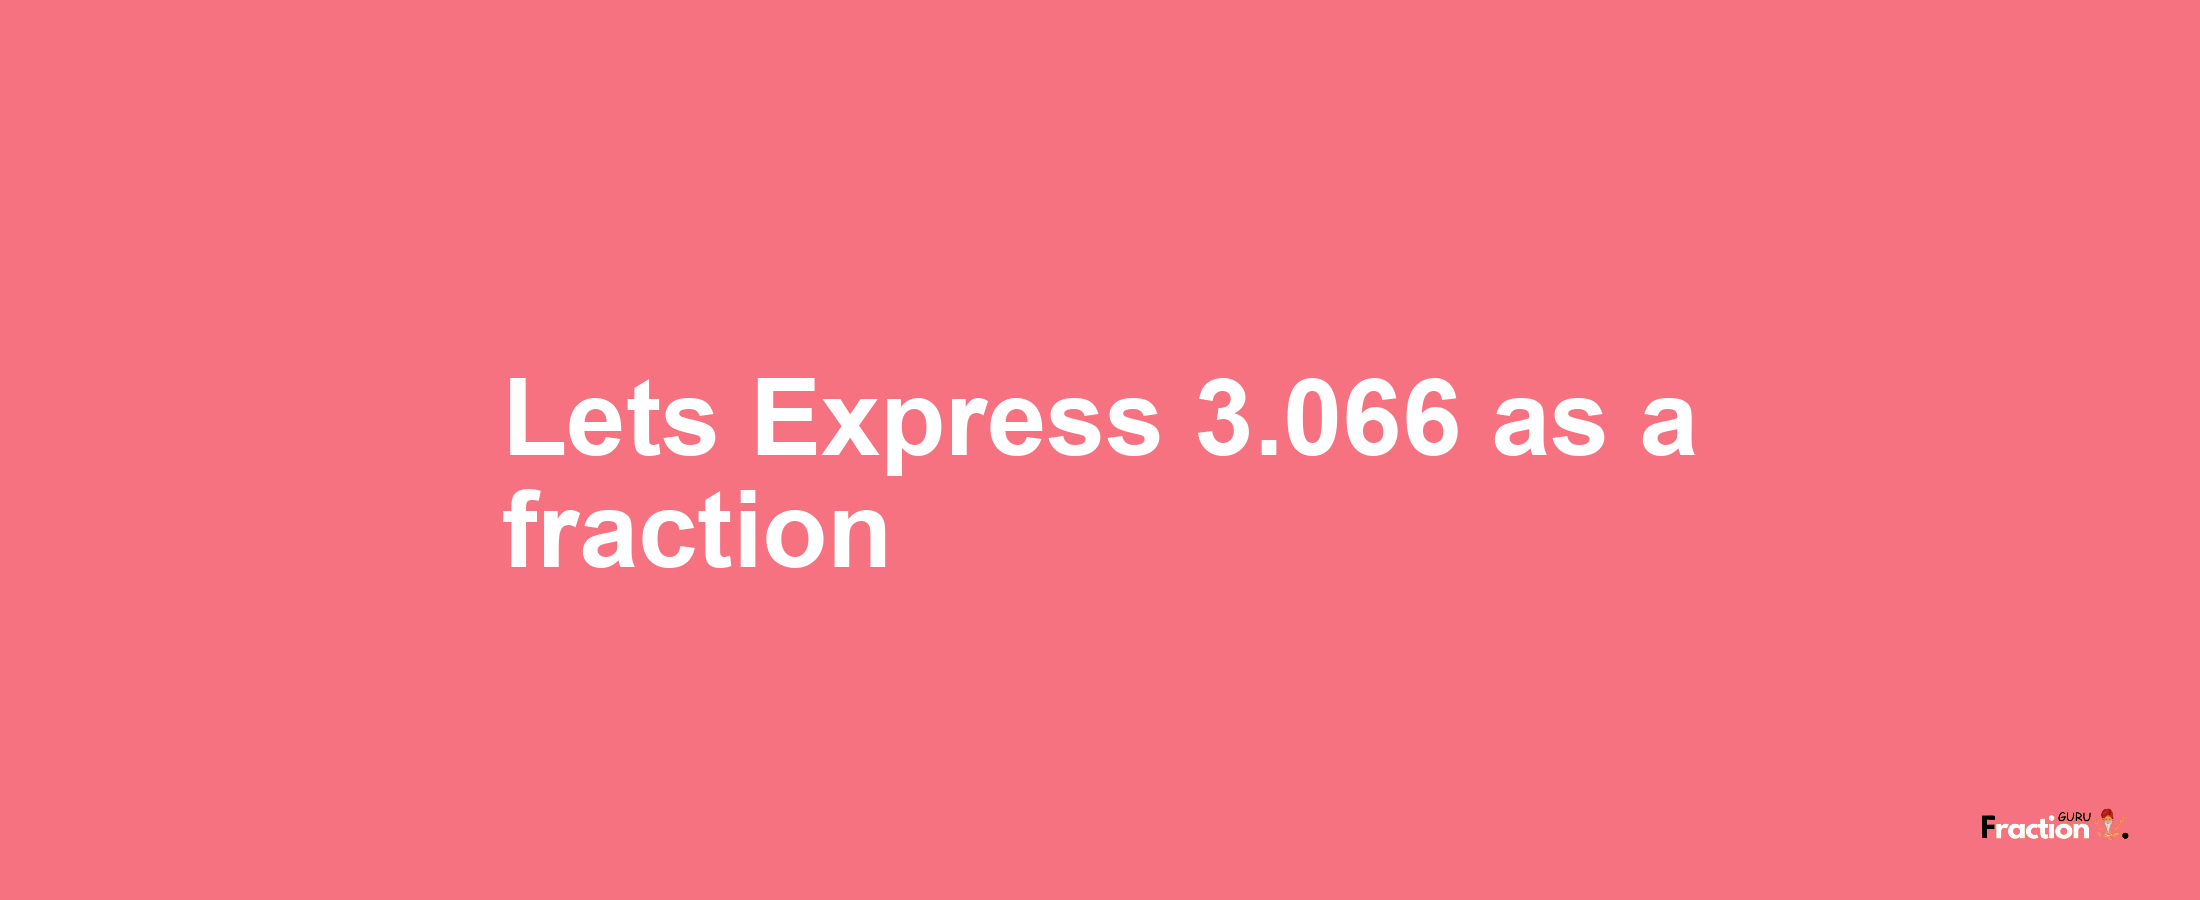 Lets Express 3.066 as afraction